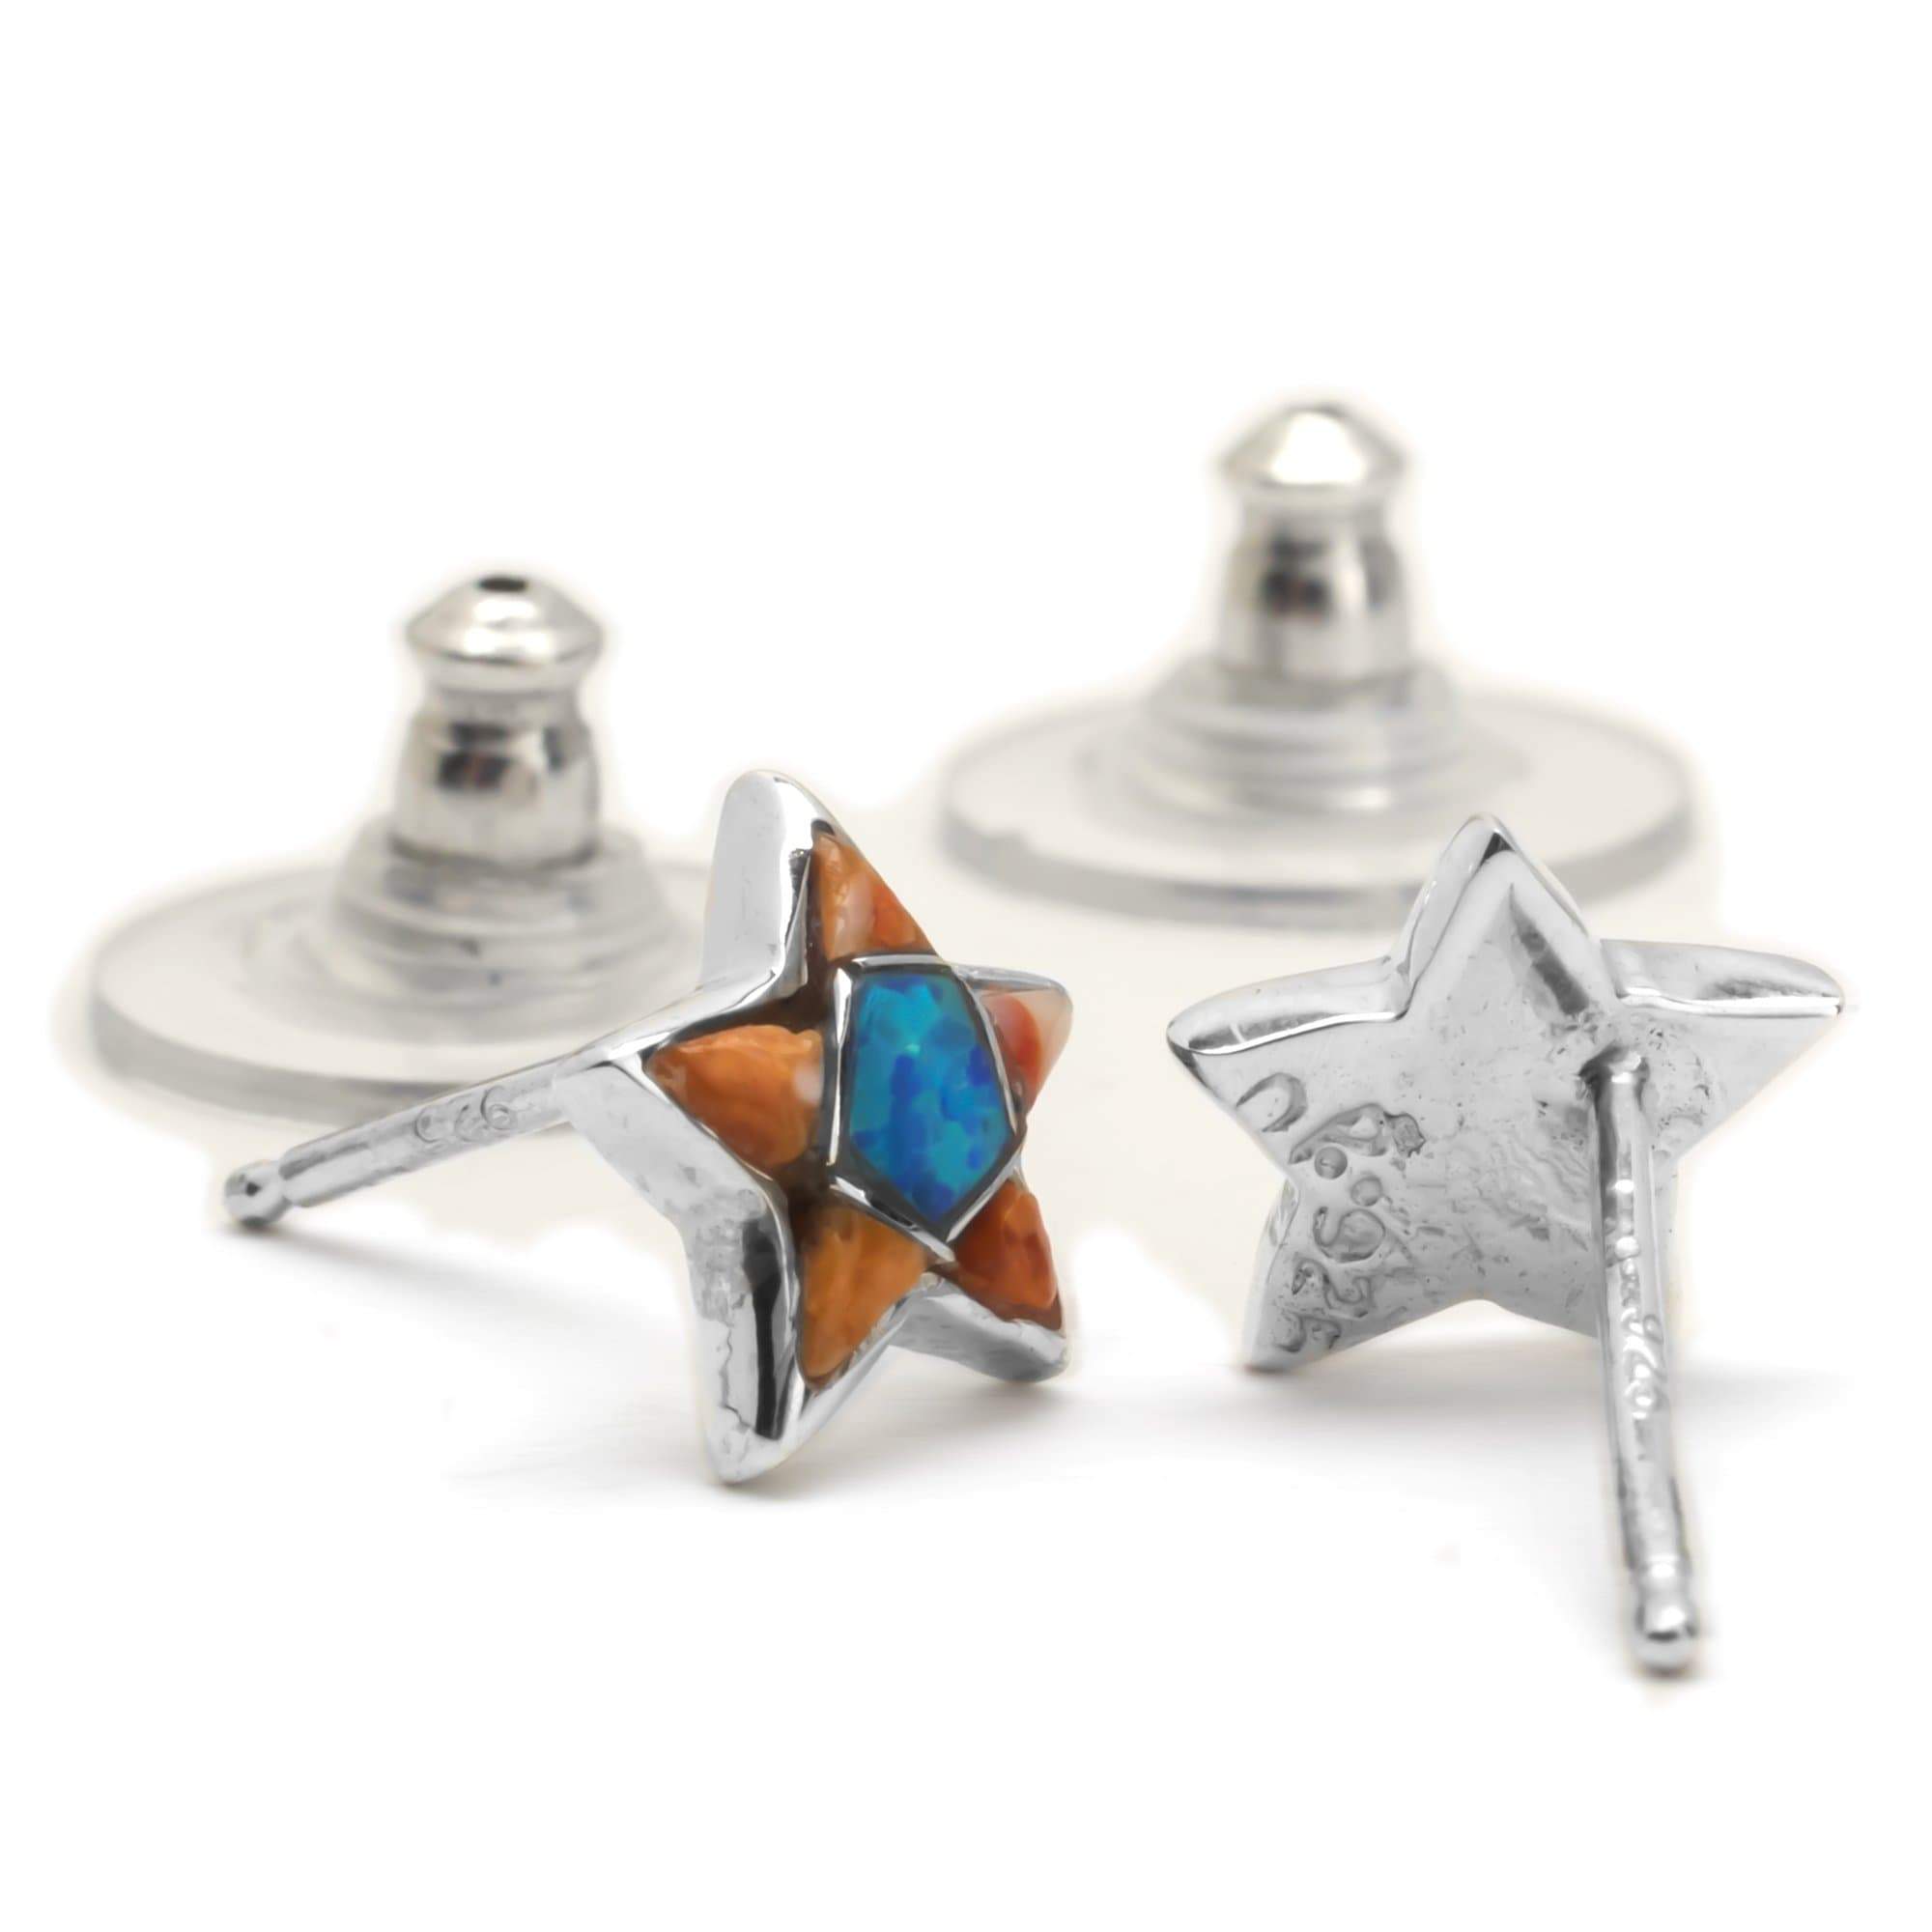 Kalifano Native American Jewelry Spiny Oyster Shell Star 925 Sterling Silver Earring with Stud Backing USA USA Handmade with Opal Accent NME.2243.SP